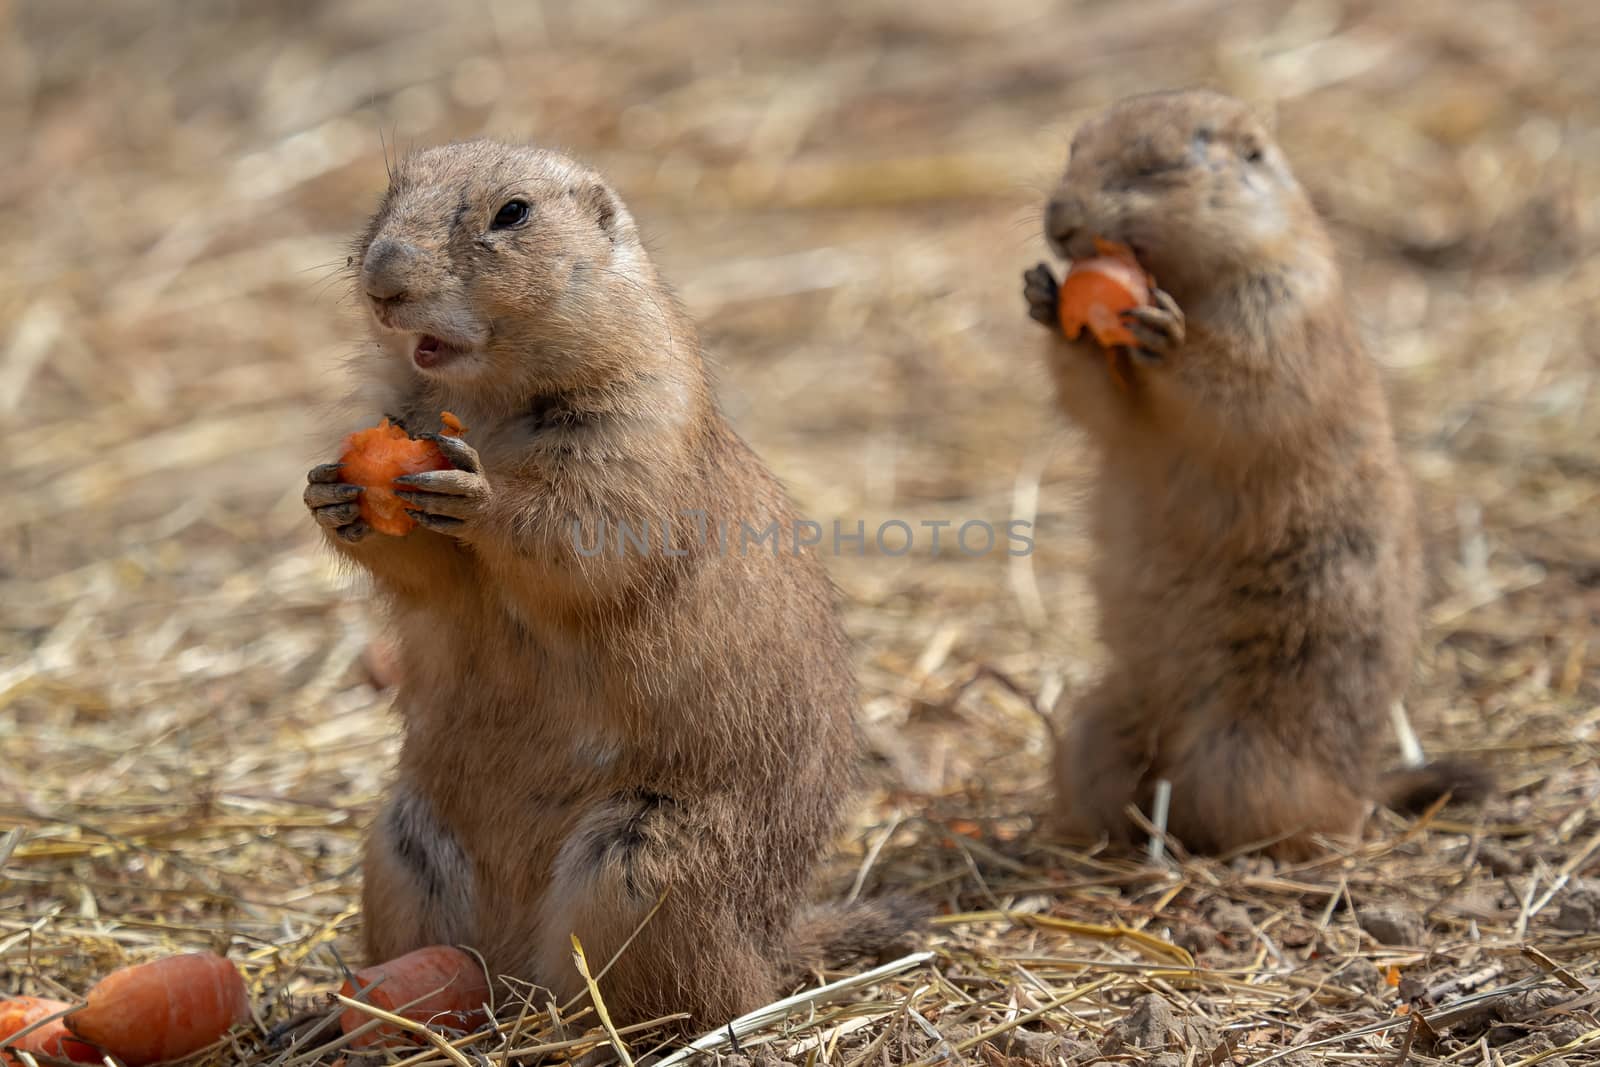 A prairie dogs (Cynomys ludovicianus) is eating a carrot